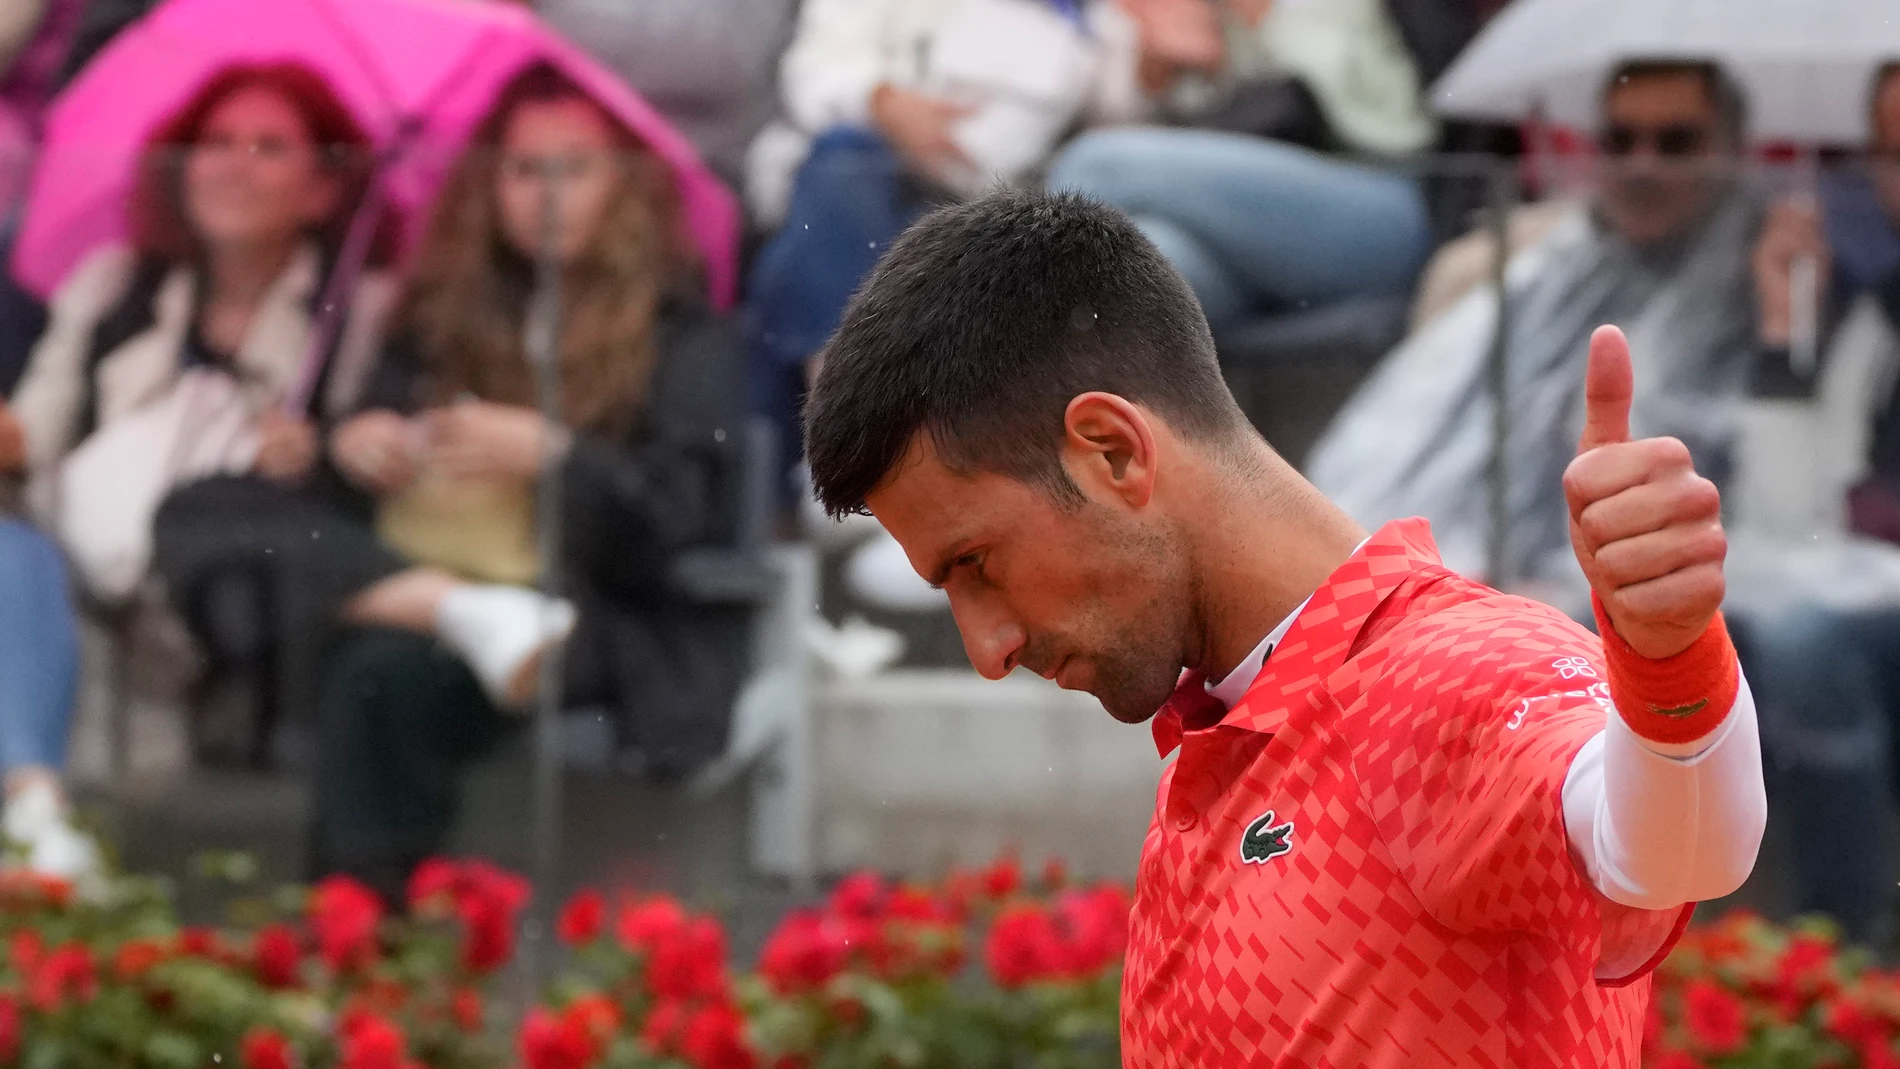 Serbia's Novak Djokovic gestures during the quarter final match against Denmark's Holger Rune at the Italian Open tennis tournament, in Rome, Wednesday, May 17, 2023. (AP Photo/Gregorio Borgia)